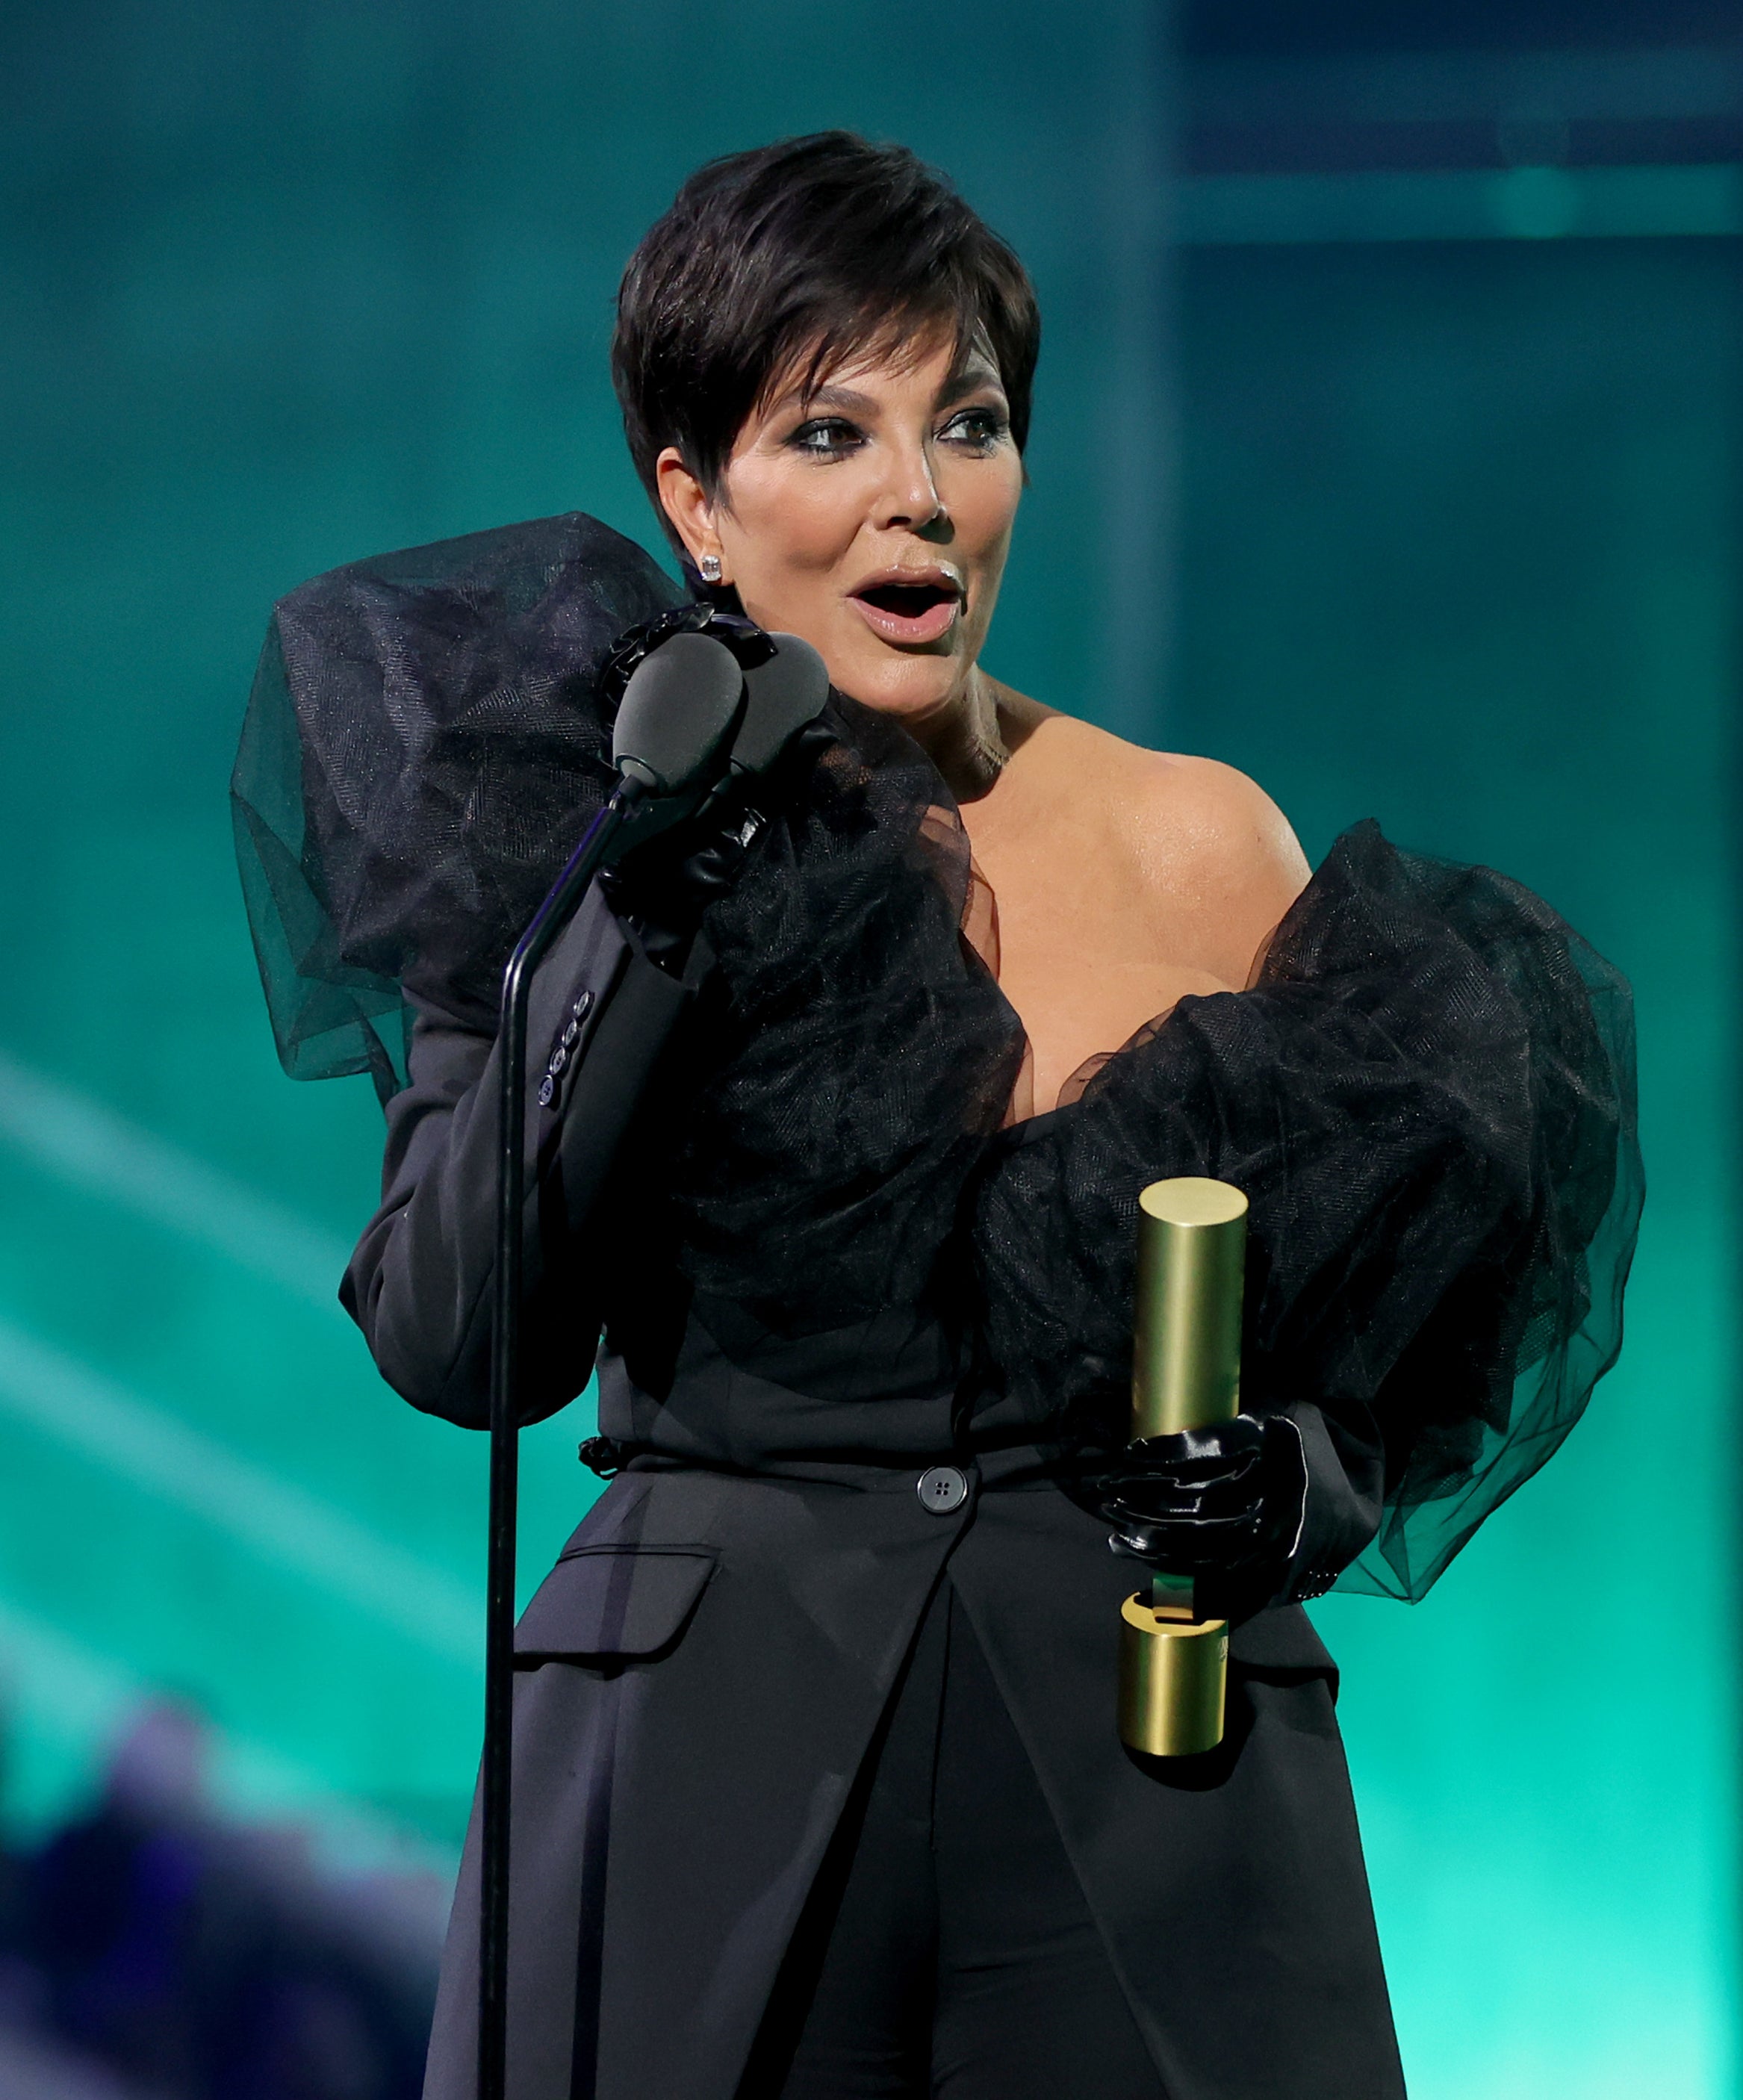 Close-up of Kris onstage holding an award